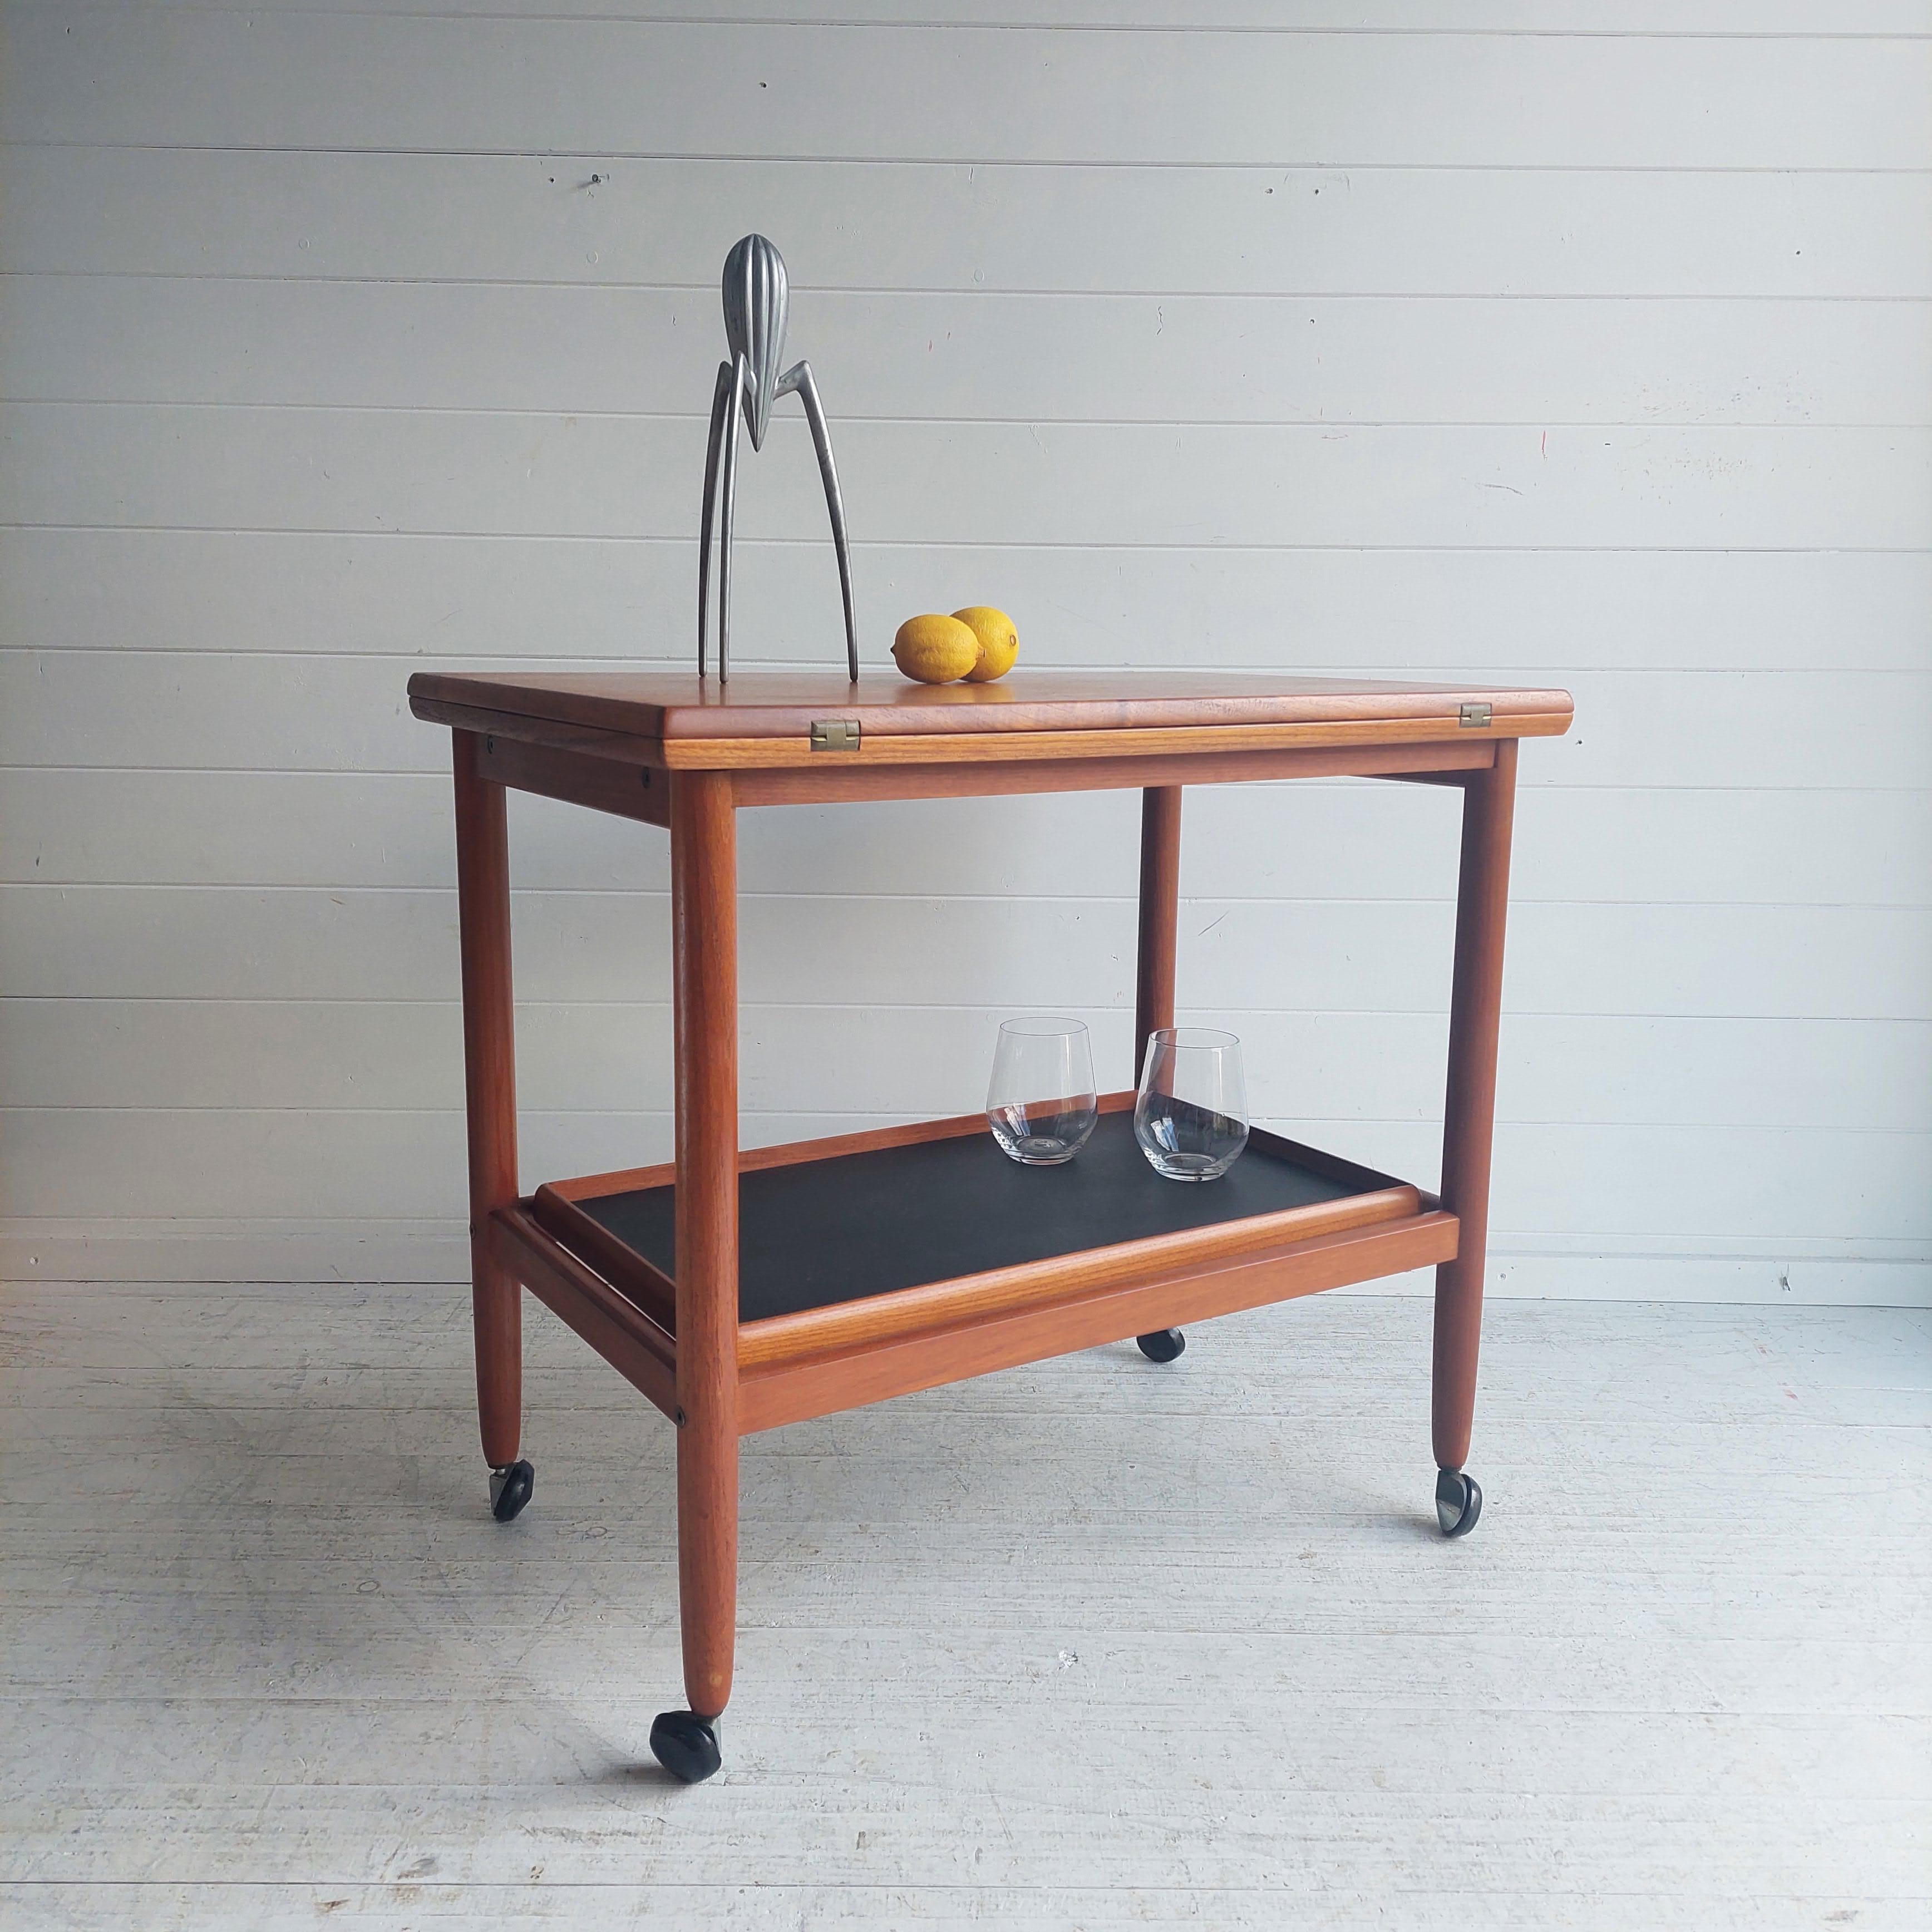 Mid Century Danish Teak Drinks Trolley / Bar Cart, by Greta Jalk for Poul Jeppesens Mobelfabrik, 1960s
This piece has been attributed based on archival documentation, such as vintage catalogs, designer records, or other literature